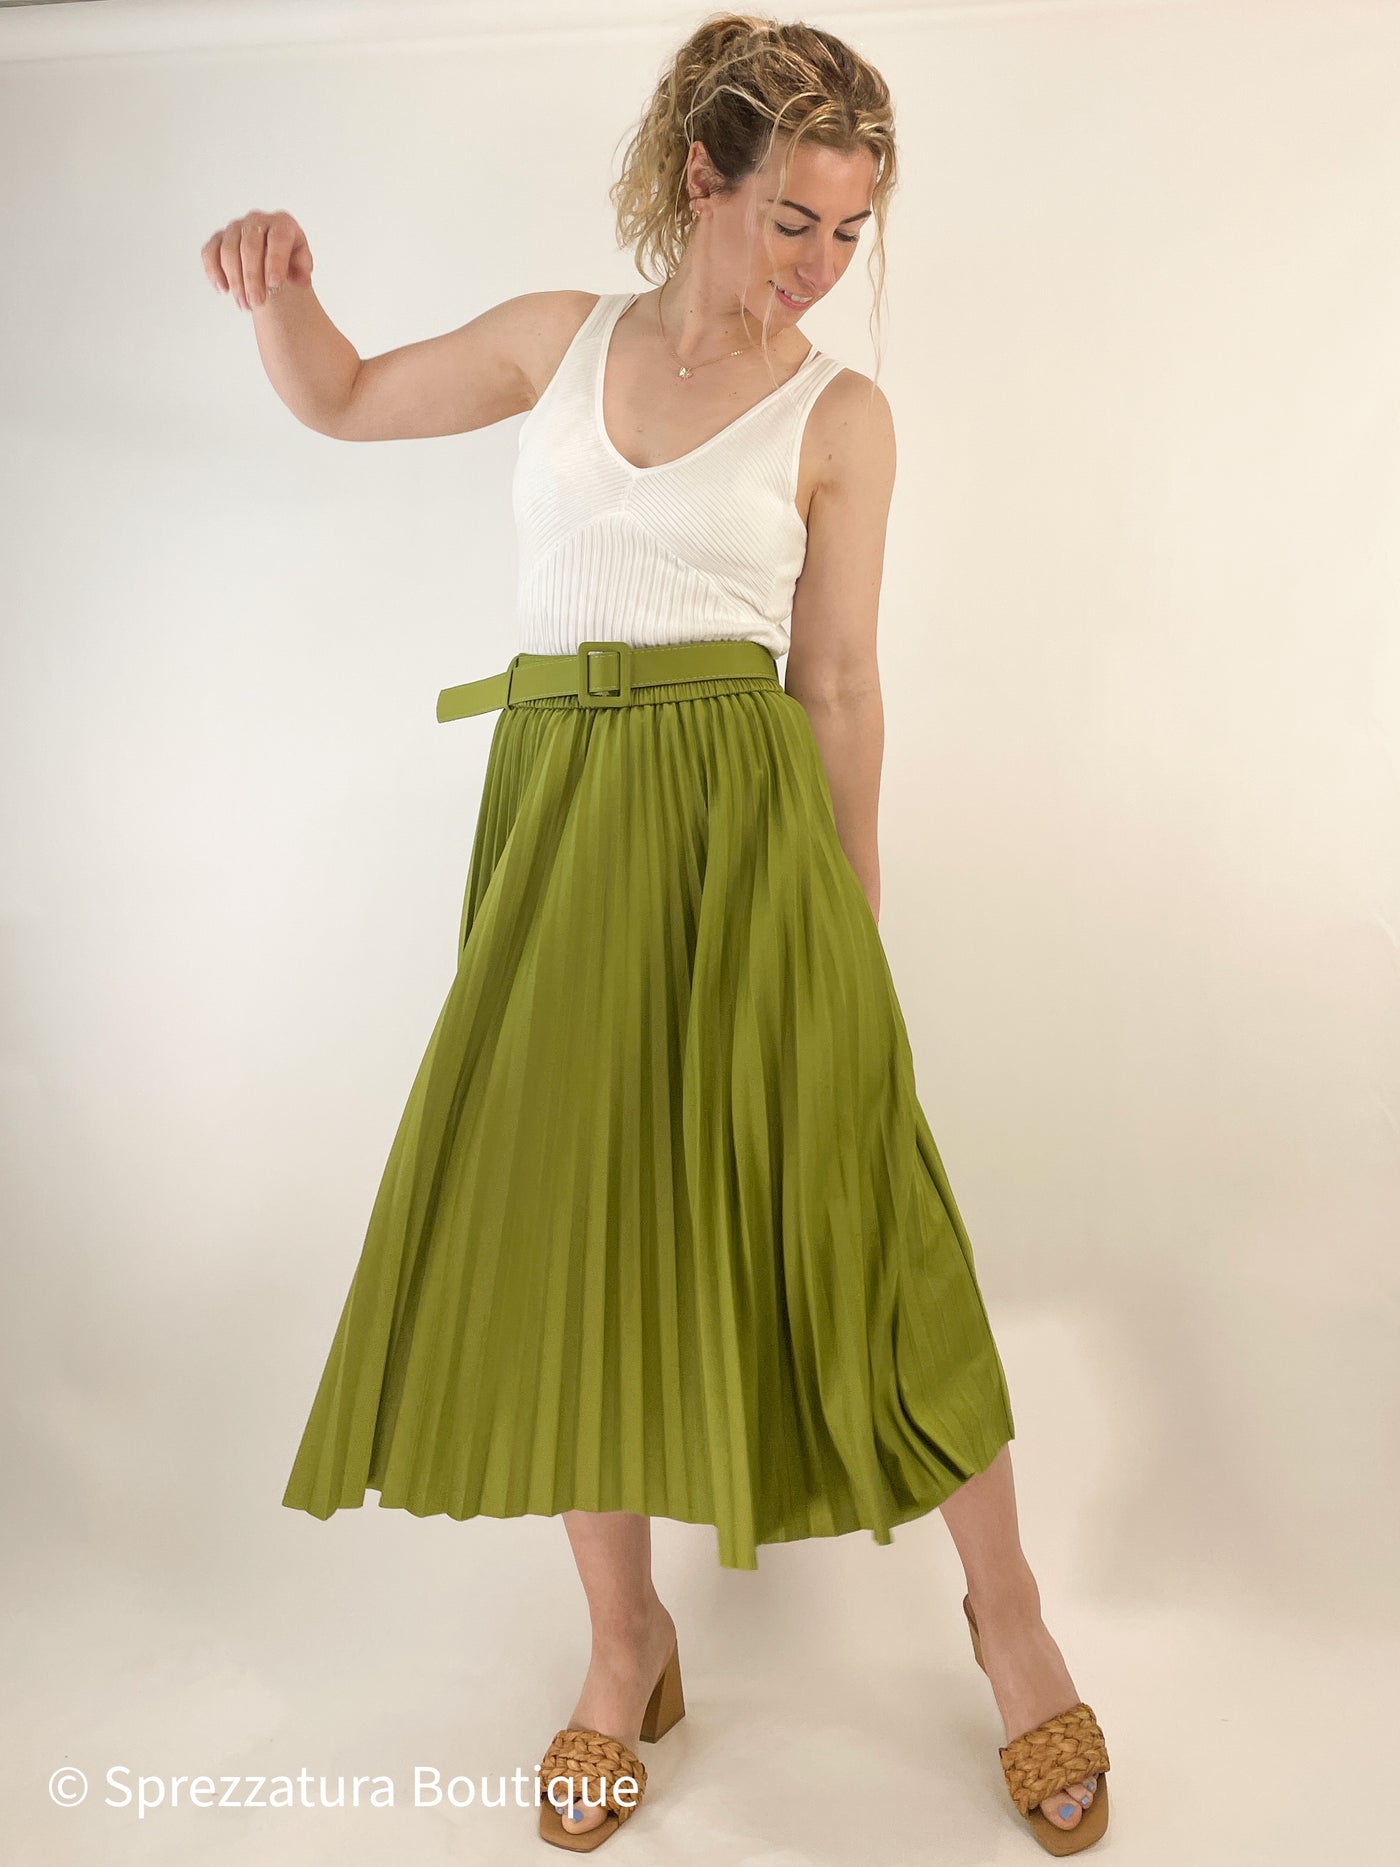 Green pleated midi timeless skirt elastic waistband chic casual everyday dressy wedding guest outfit Modern smart causal female chic effortless outfit womens ladies gift elegant effortless clothing everyday stylish clothes apparel outfits chic winter summer style women’s boutique trendy teacher office cute outfit boutique clothes fashion quality work from home coastal beachy 